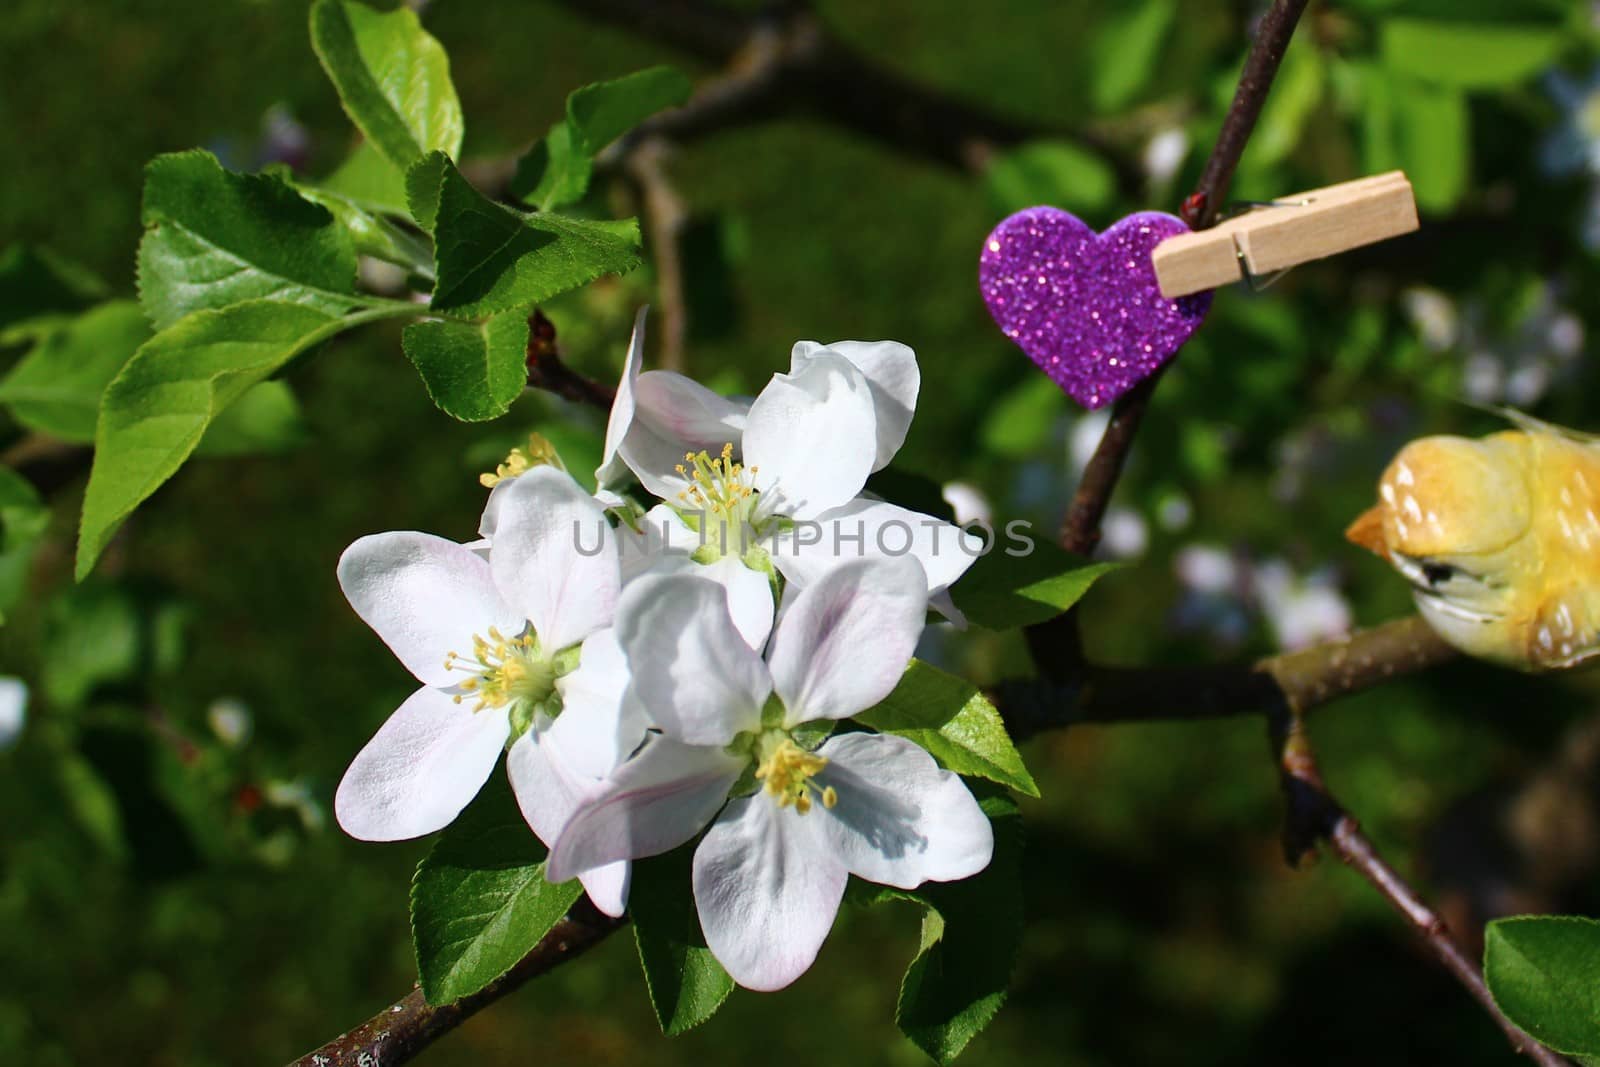 The picture shows apple tree blossoms and a heart.